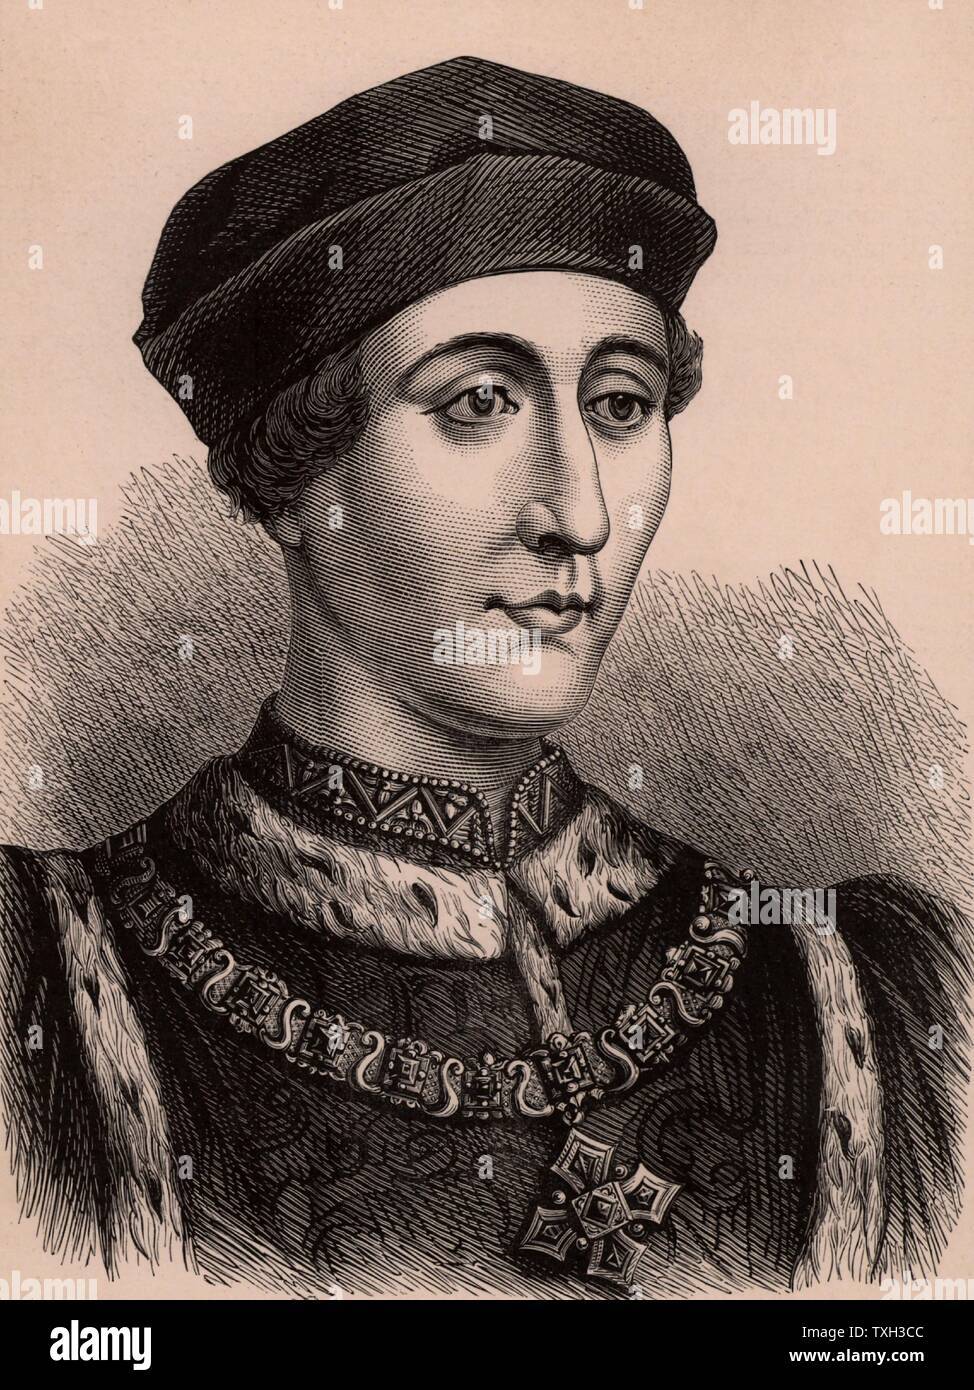 Henry VI (1421-71) king of England from 1422, only child of Henry V and Catherine of Valois. Last Plantagenet king of England his throne was usurped by Edward IV in 1461. Henry was murdered 21 May 1471. c.1900 Wood engraving Stock Photo